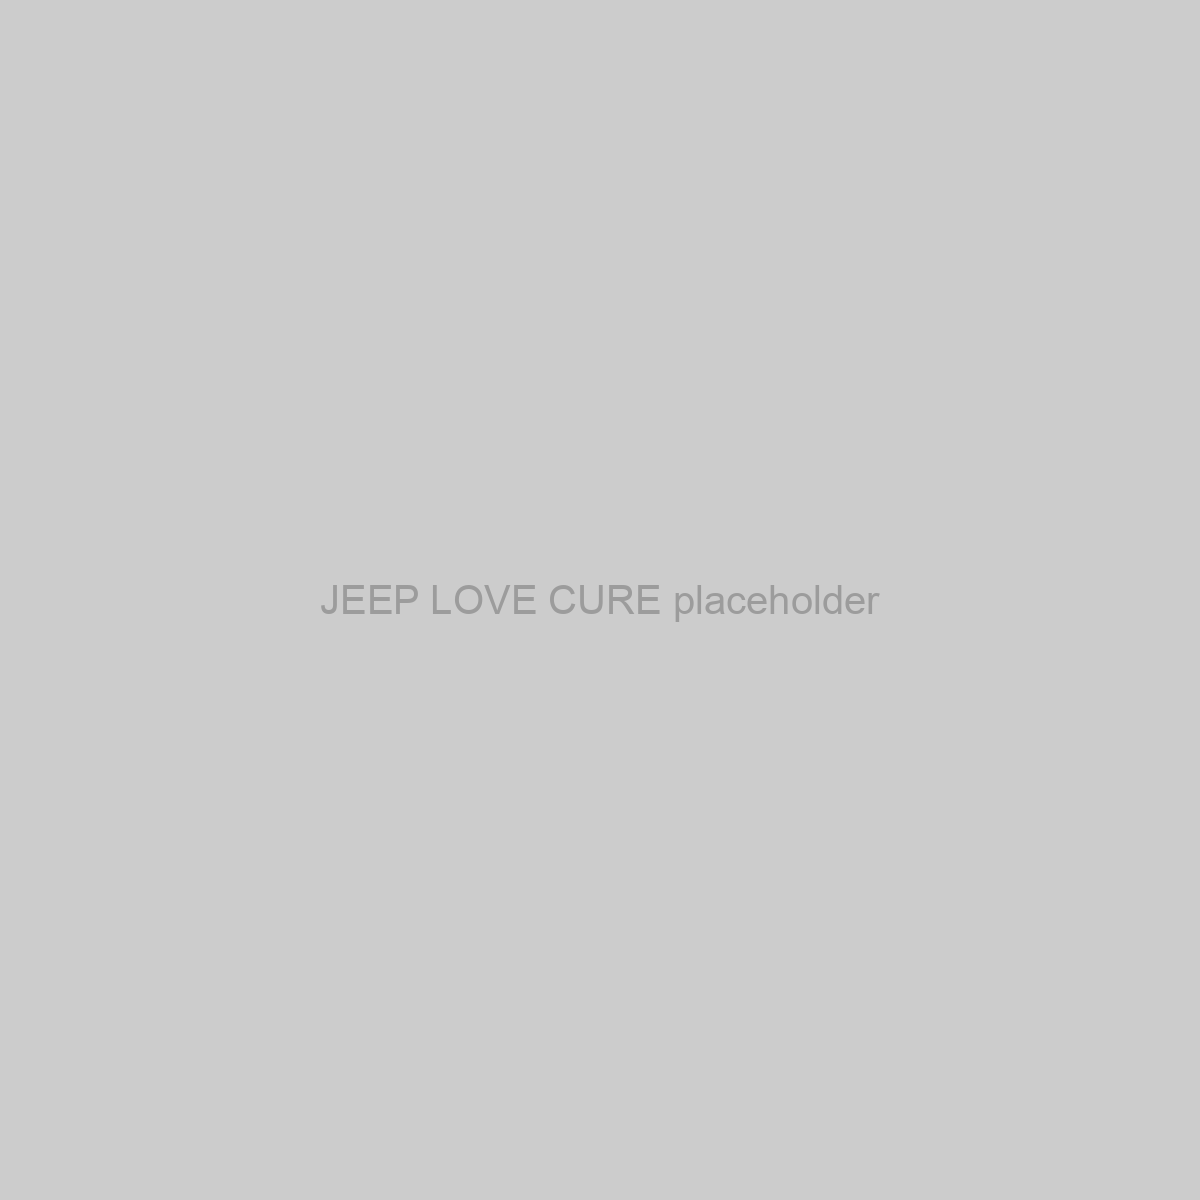 JEEP LOVE CURE Placeholder Image